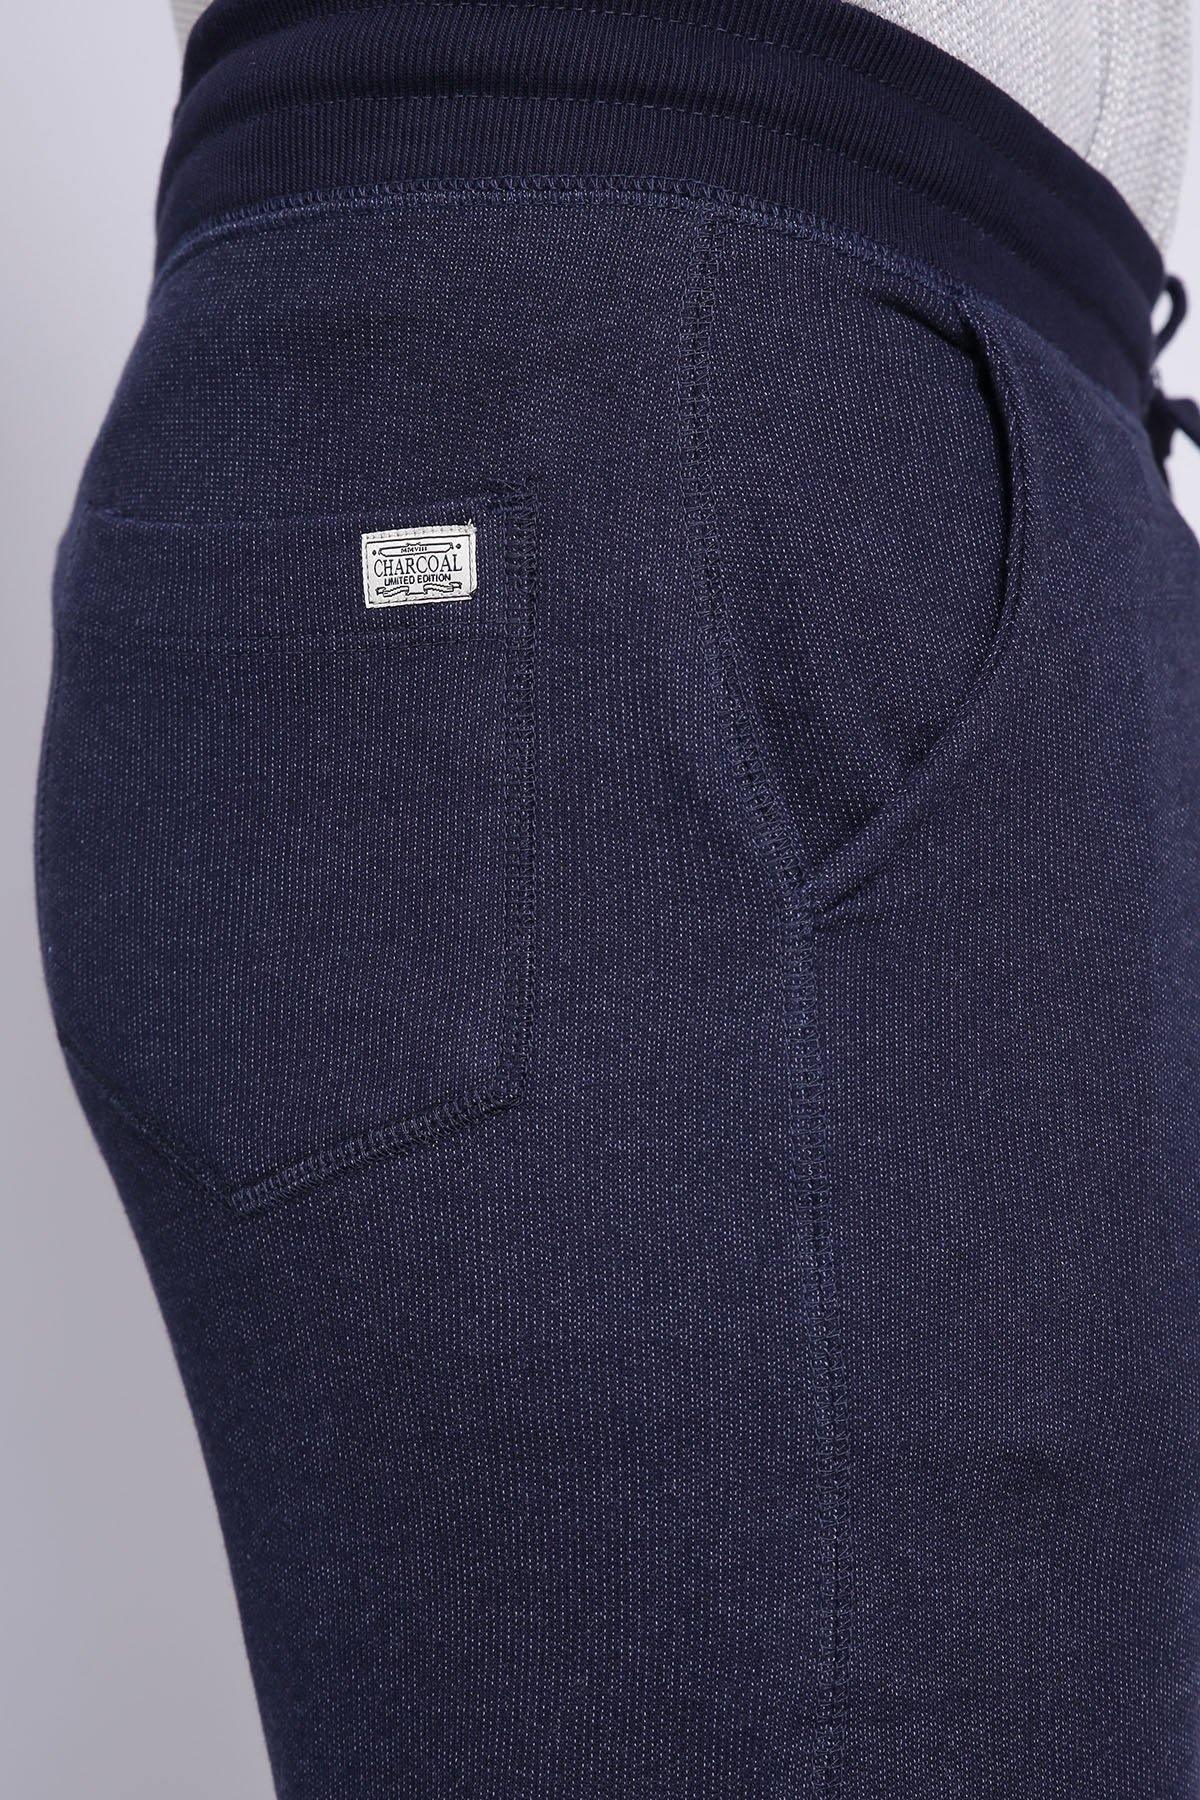 CHAIN YARN TROUSER NAVY at Charcoal Clothing